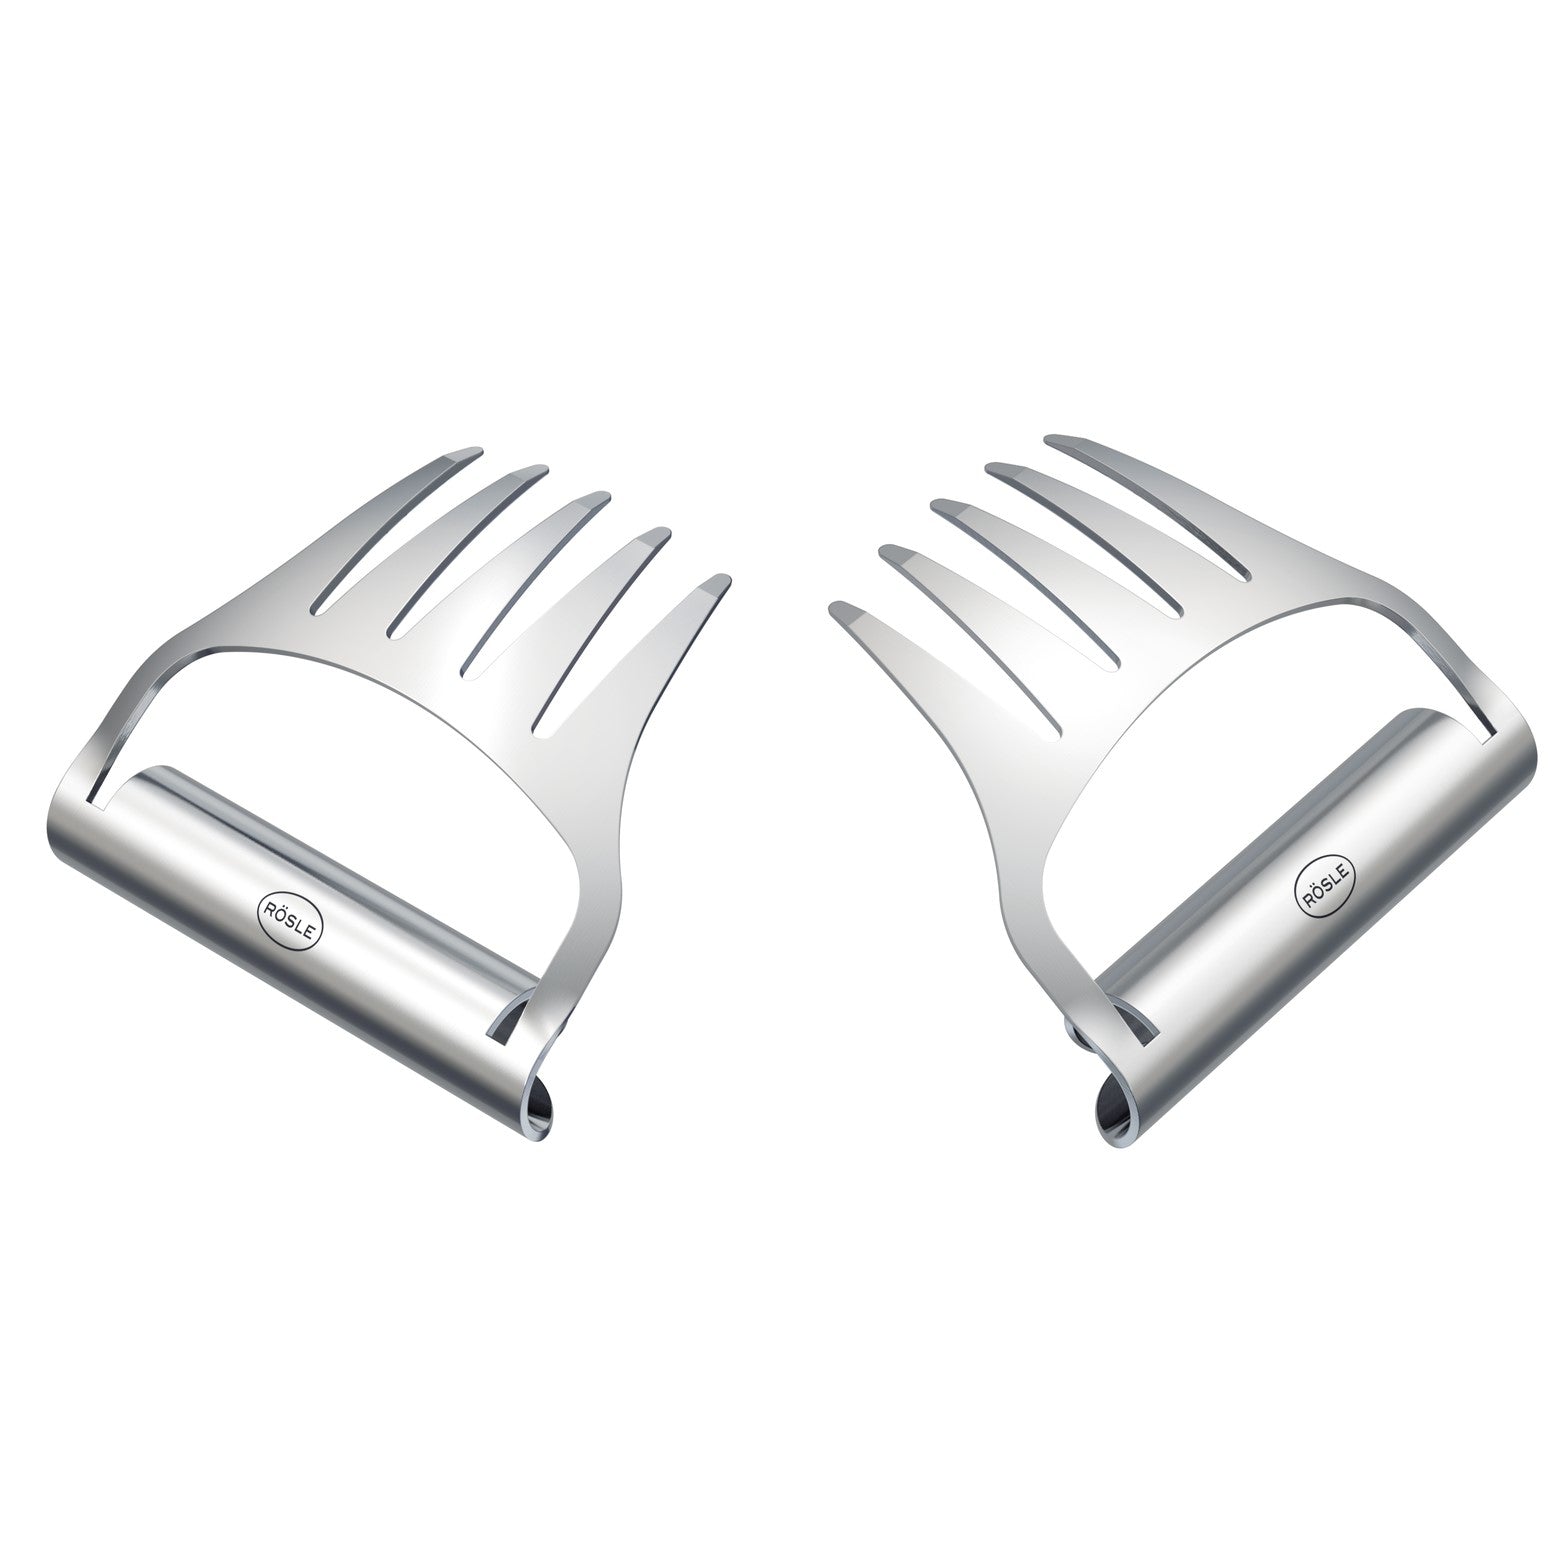 Roesle Pulled Pork Fork Stainless Steel x 2 Pieces